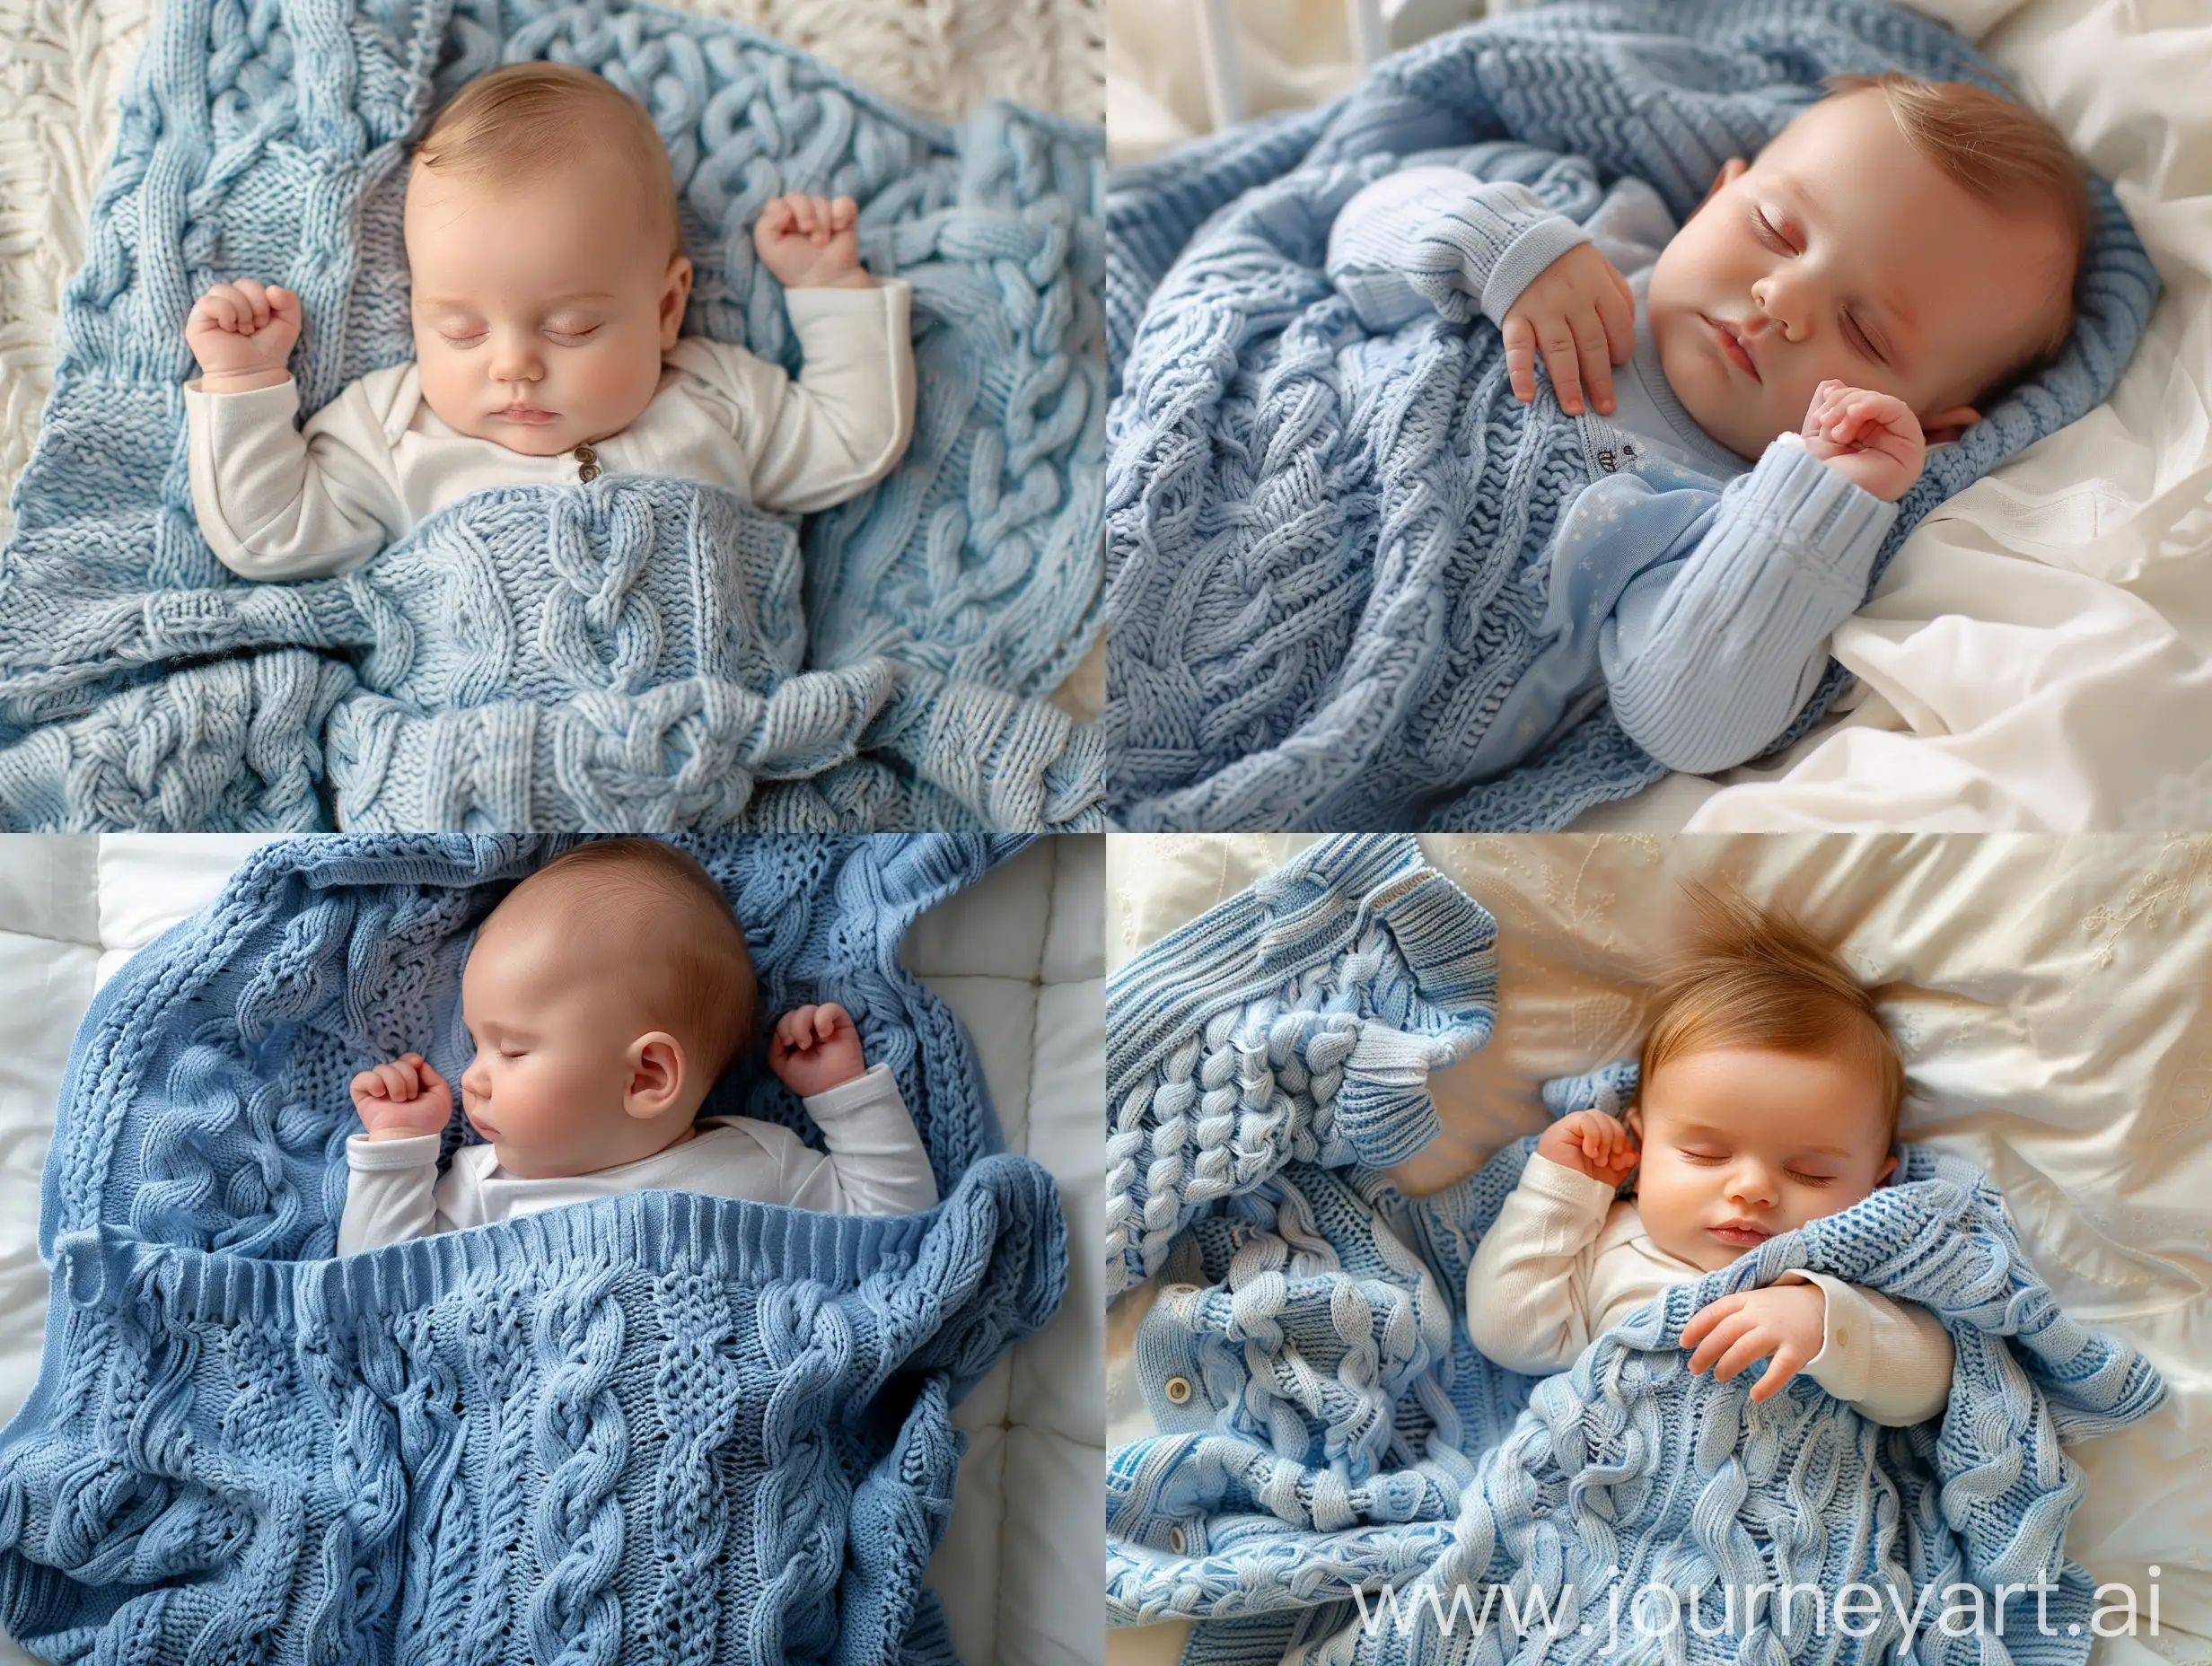 New born baby boy in bed. New born child sleeping under a blue knitted blanket. Children sleep. Bedding for kids. Infant napping in bed. Healthy little kid shortly after birth. Cable knit textile